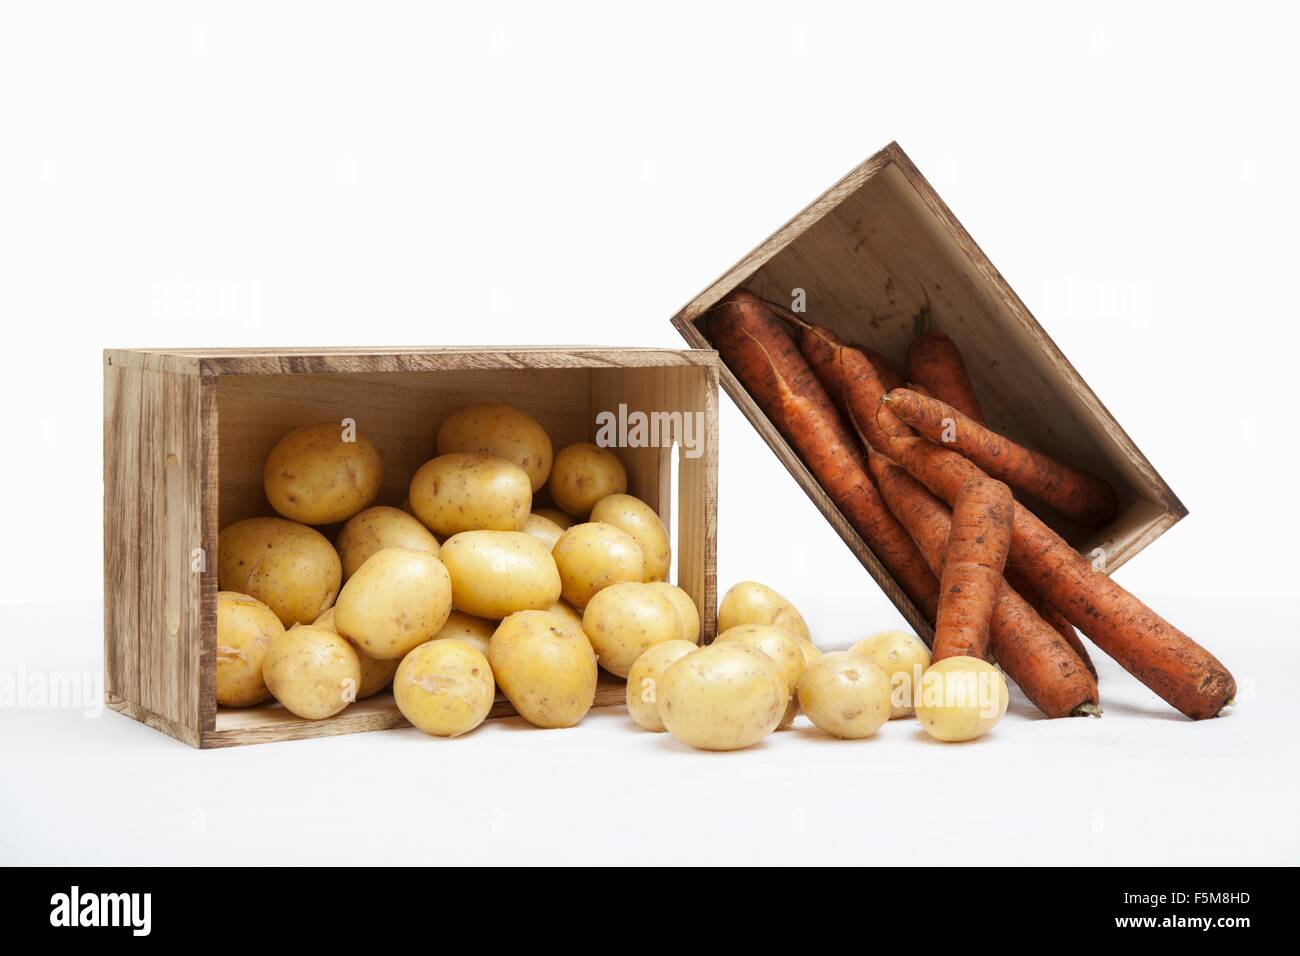 Crates Of Carrots High Resolution Stock Photography and Images -